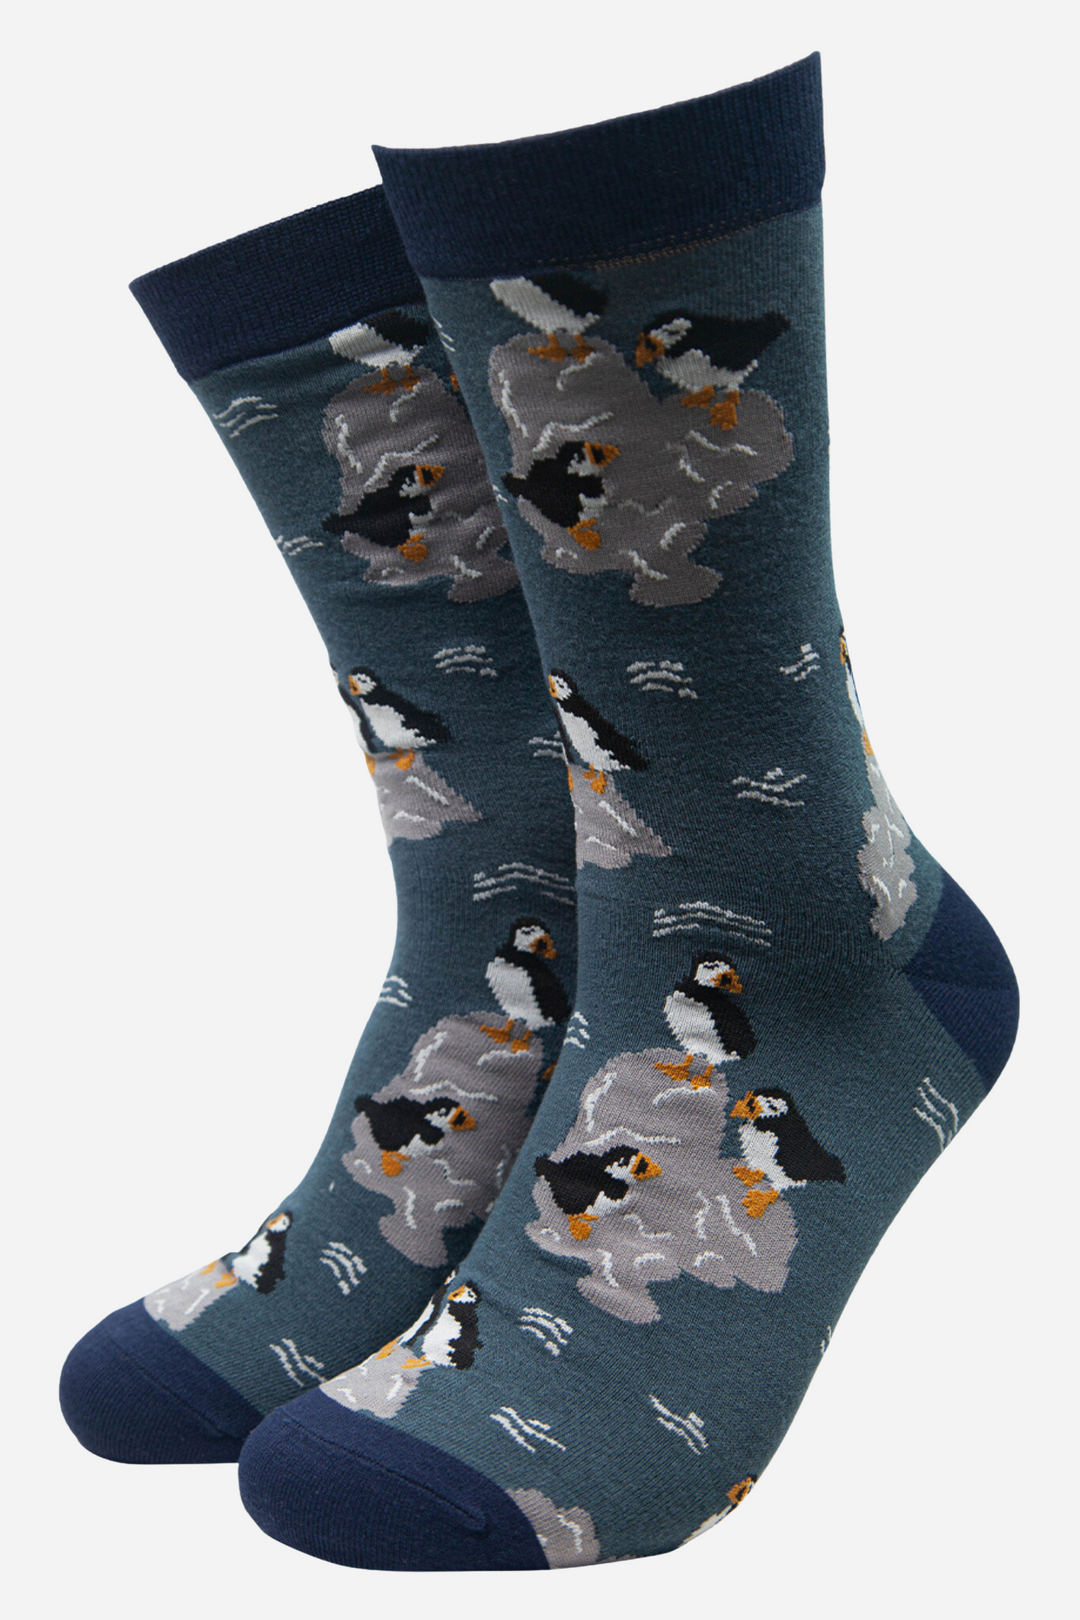 teal blue socks with a pattern of puffin birds sitting on grey rocks 